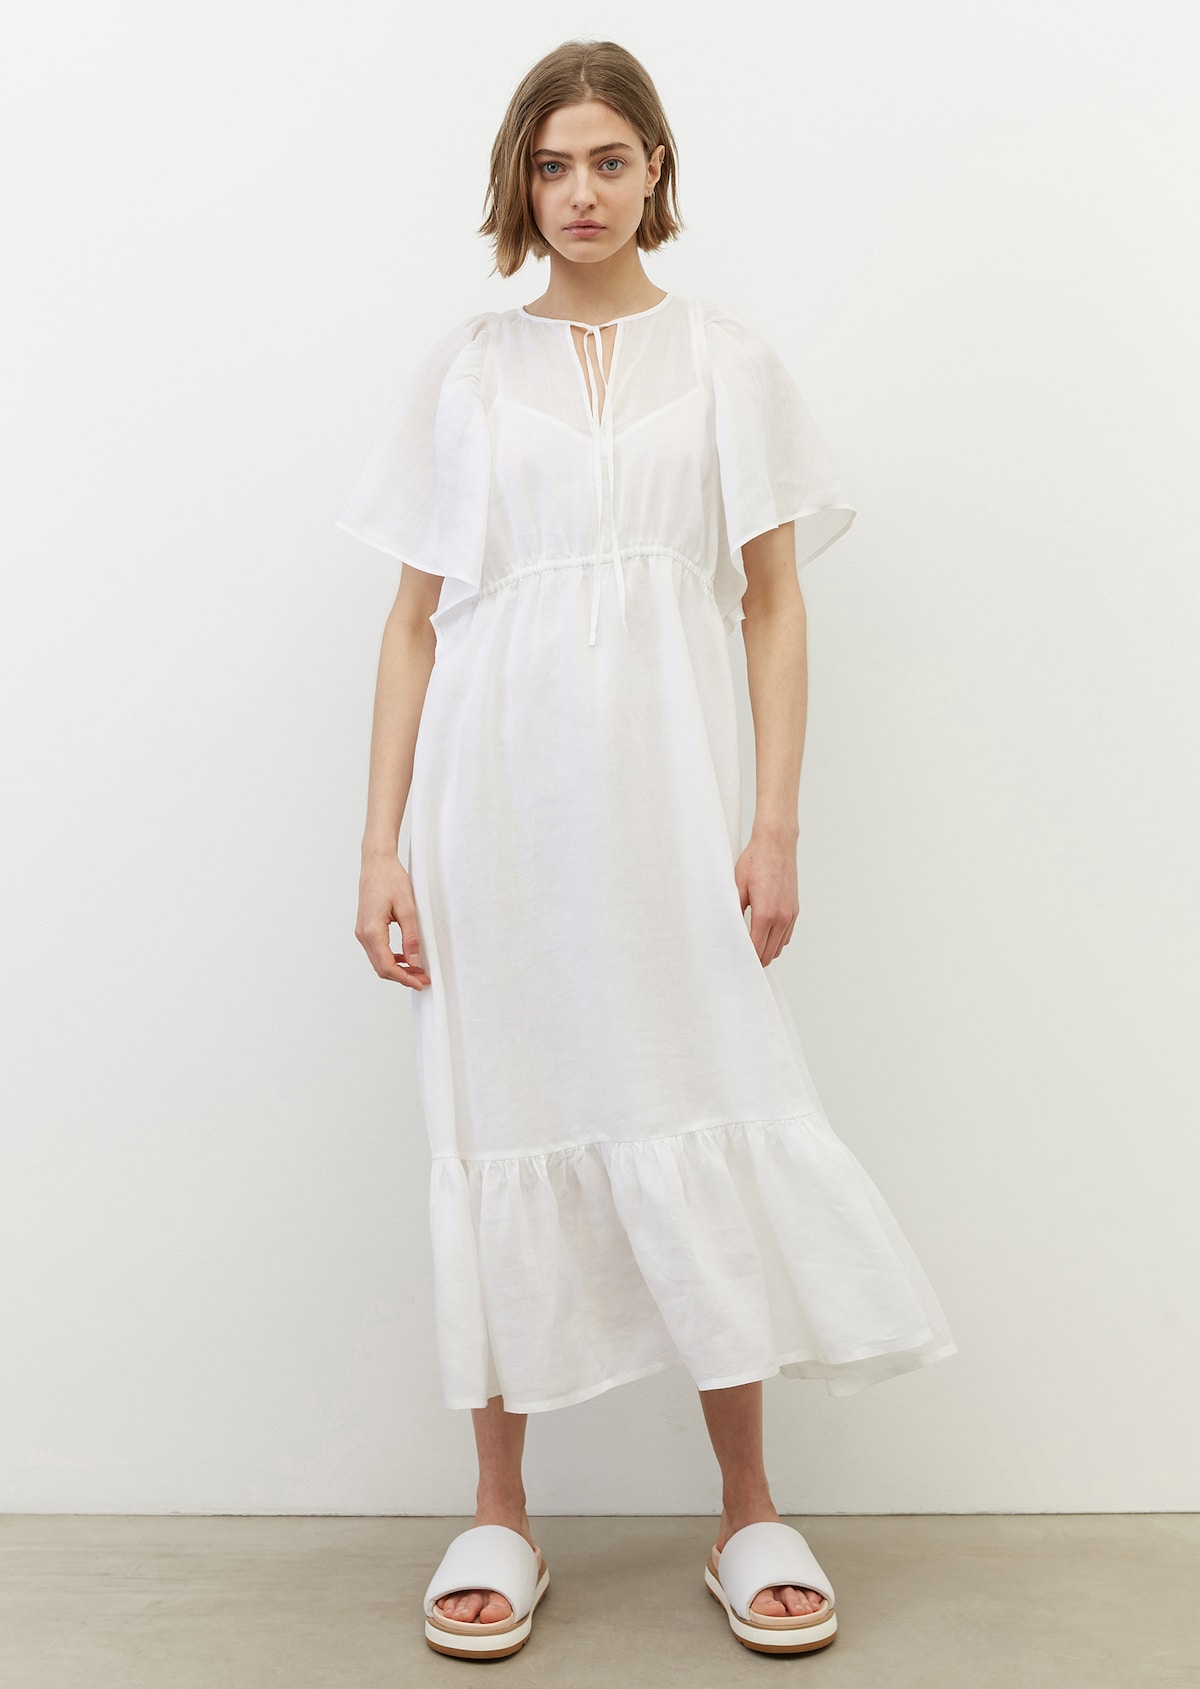 Frilled dress made of high-quality Ramie fabric - white | Summer ...